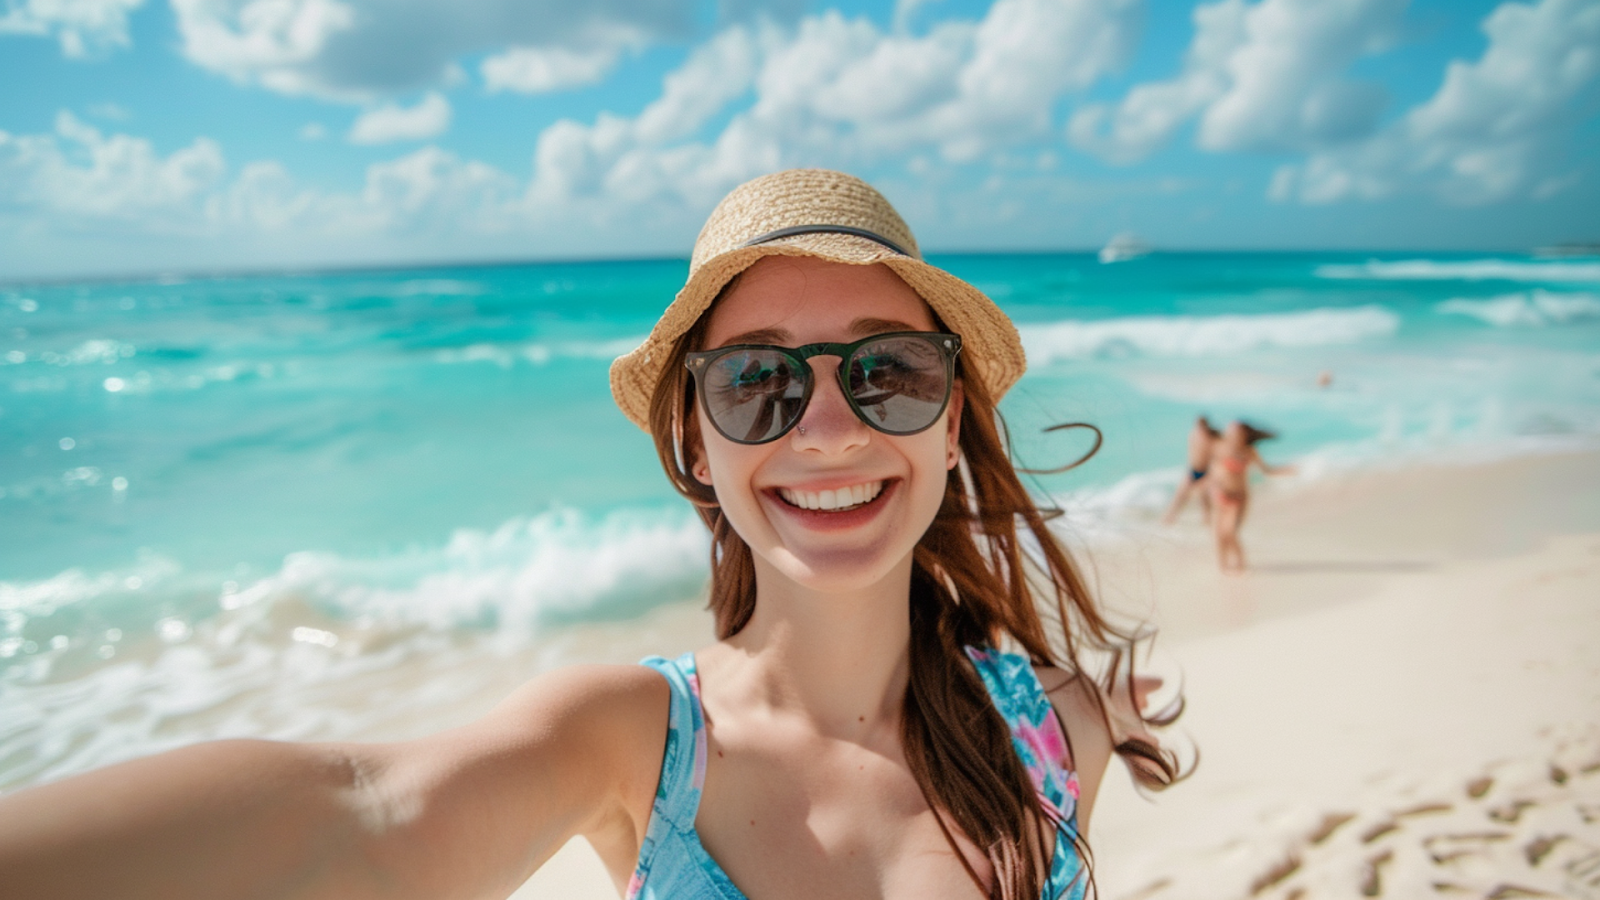 A woman taking a selfie on the beach